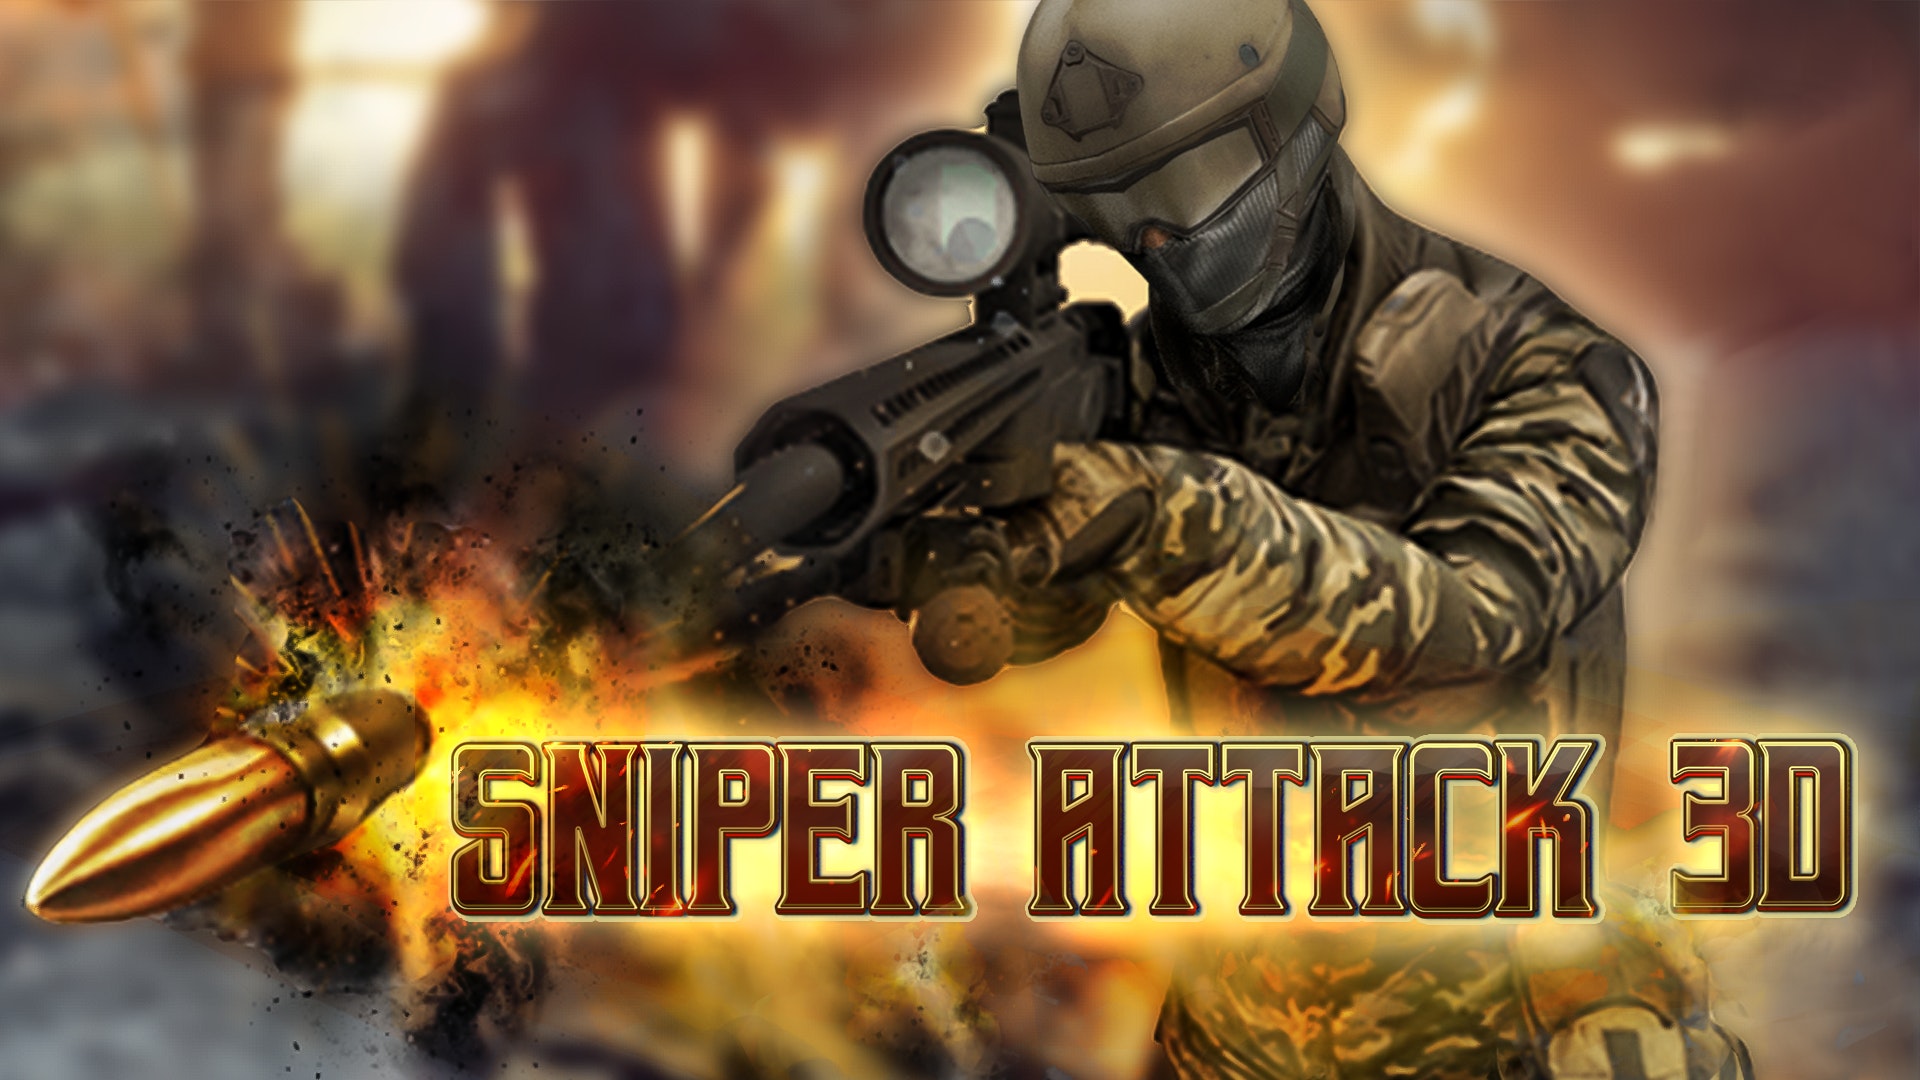 Ghost Sniper - Free 3D Action Game on